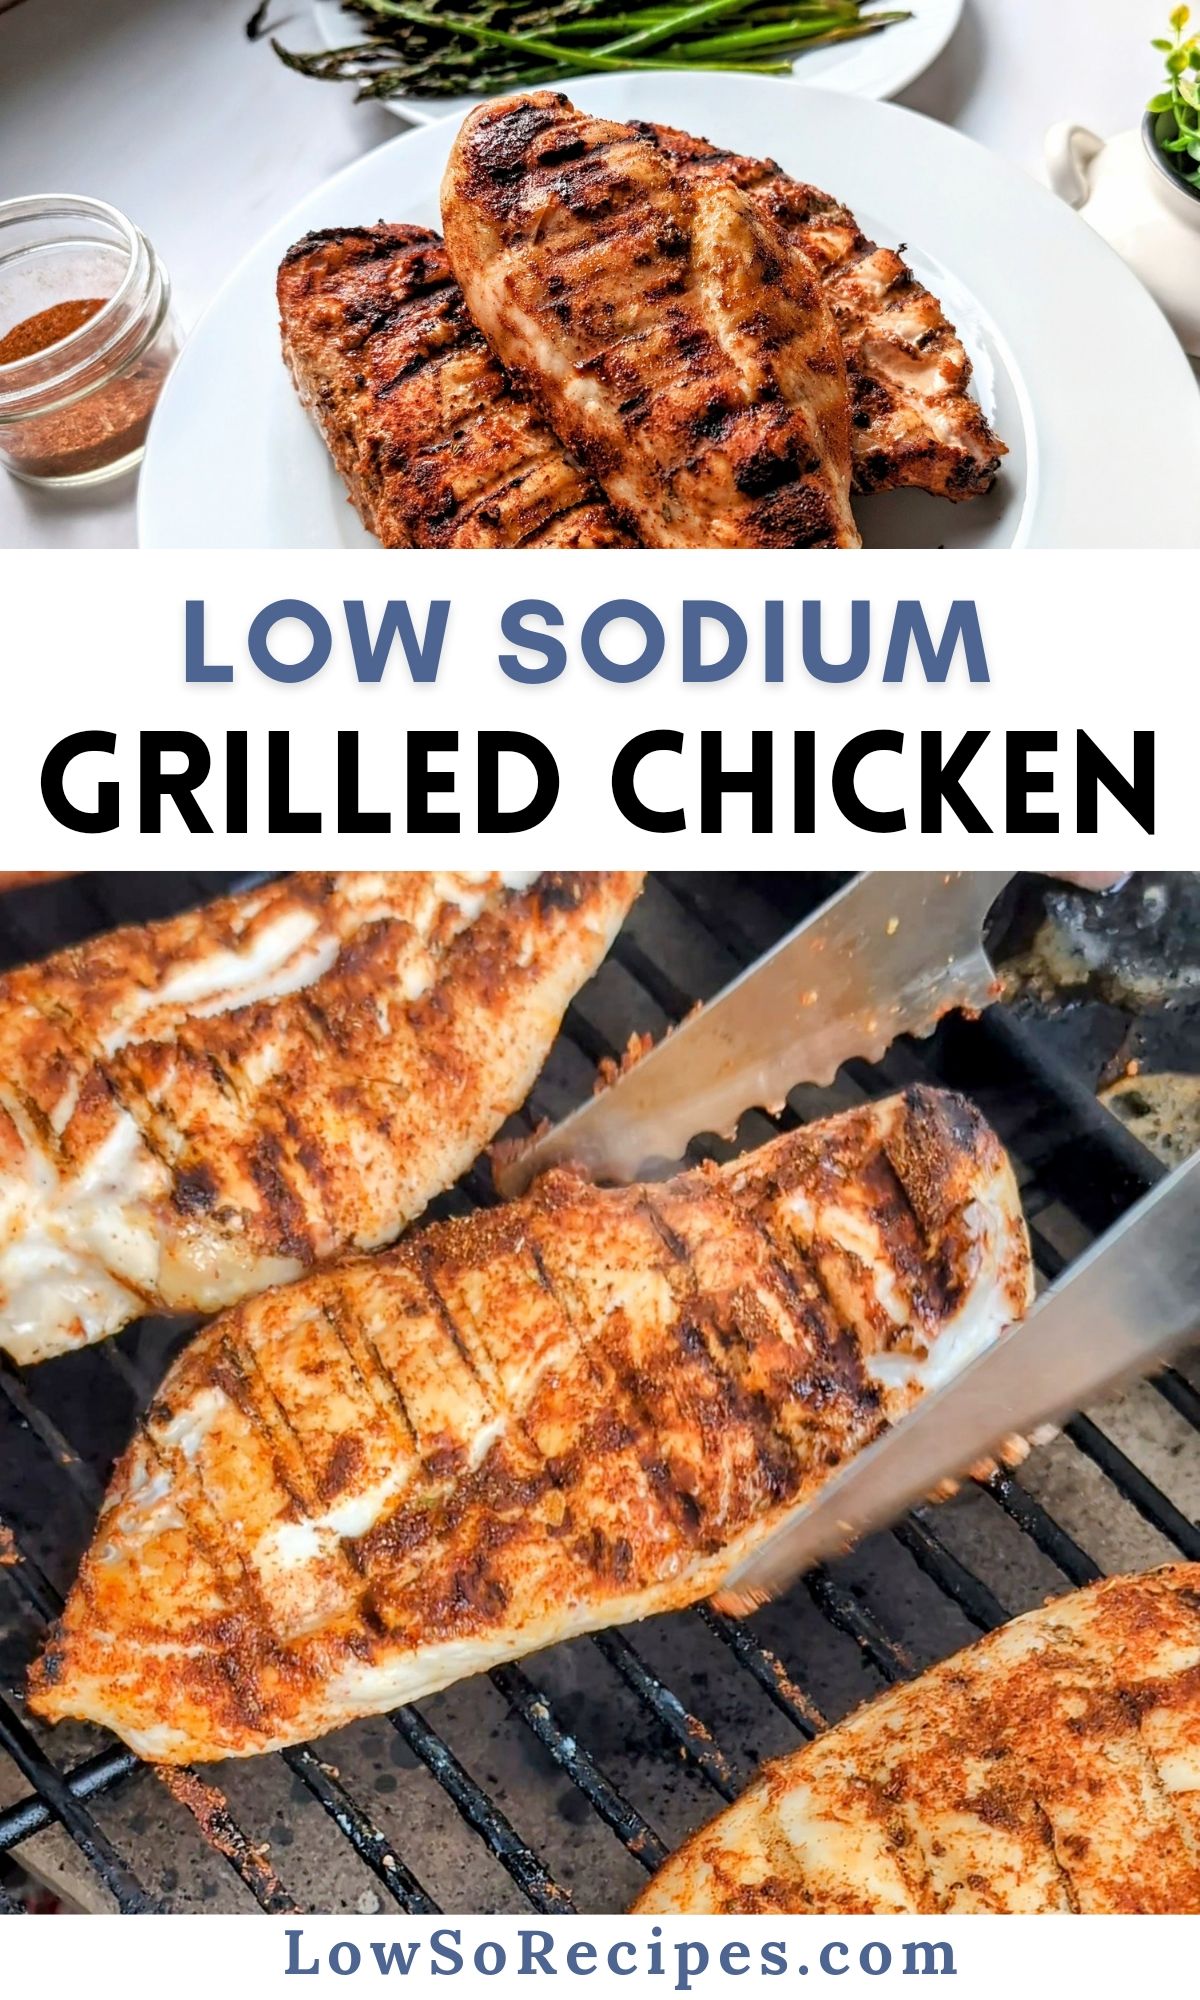 low sodium grilled chicken breasts recipe with paprika, chili powder, and fresh lime juice